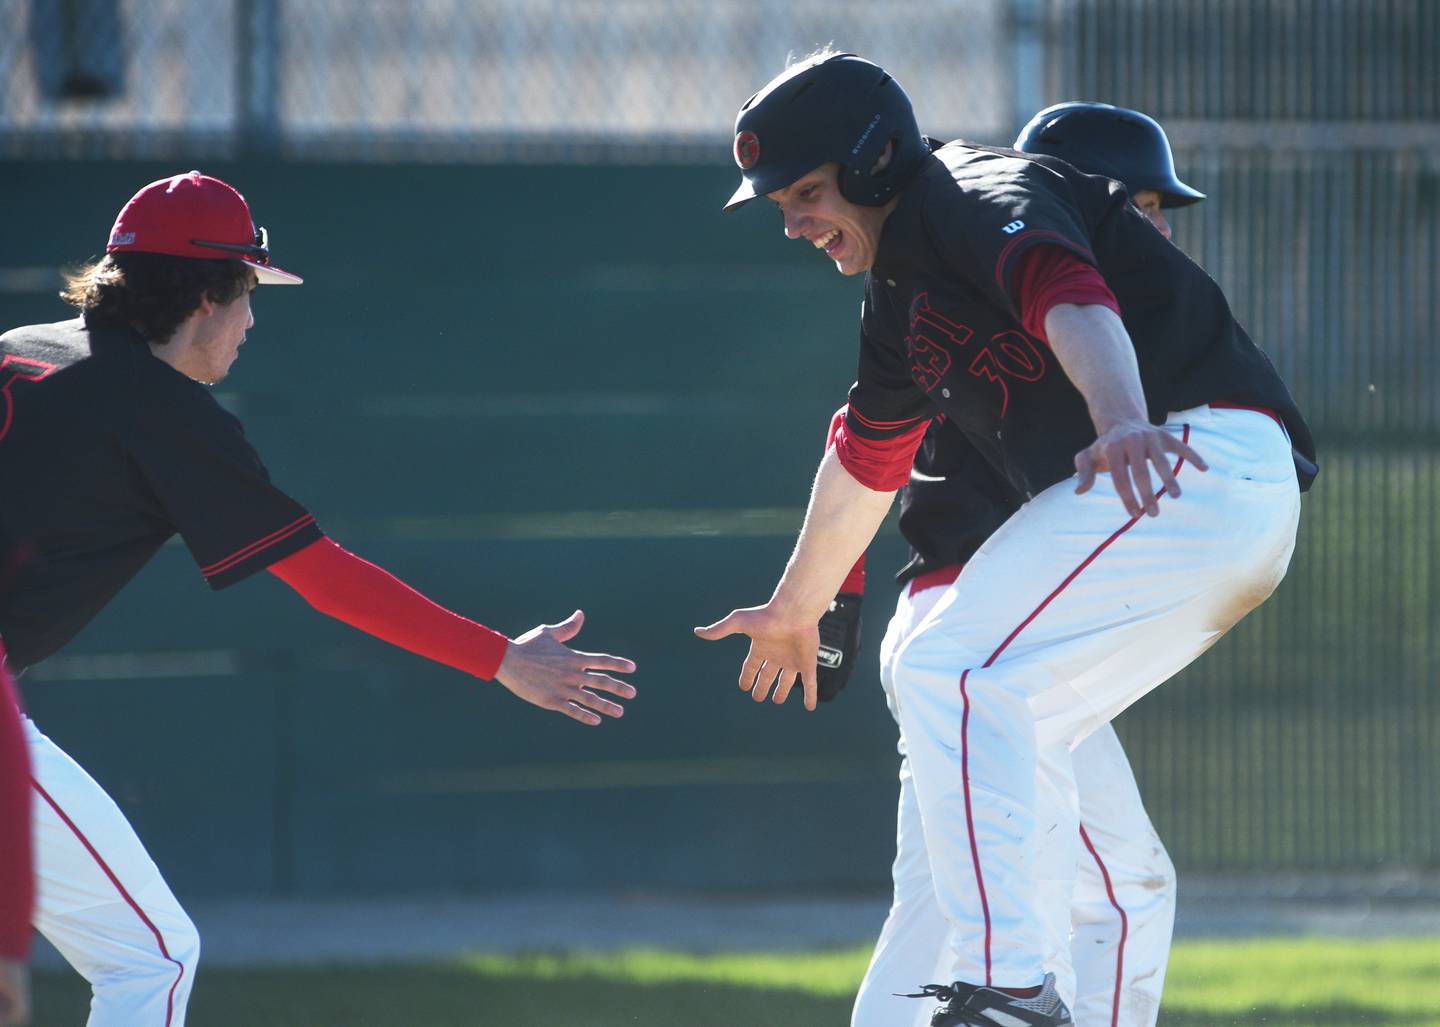 Glenbard East's Eddie Vercruysee (30) scores on a base hit and kids kudos from teammate Colin Murphy during during Thursday's baseball game against Bartlett.